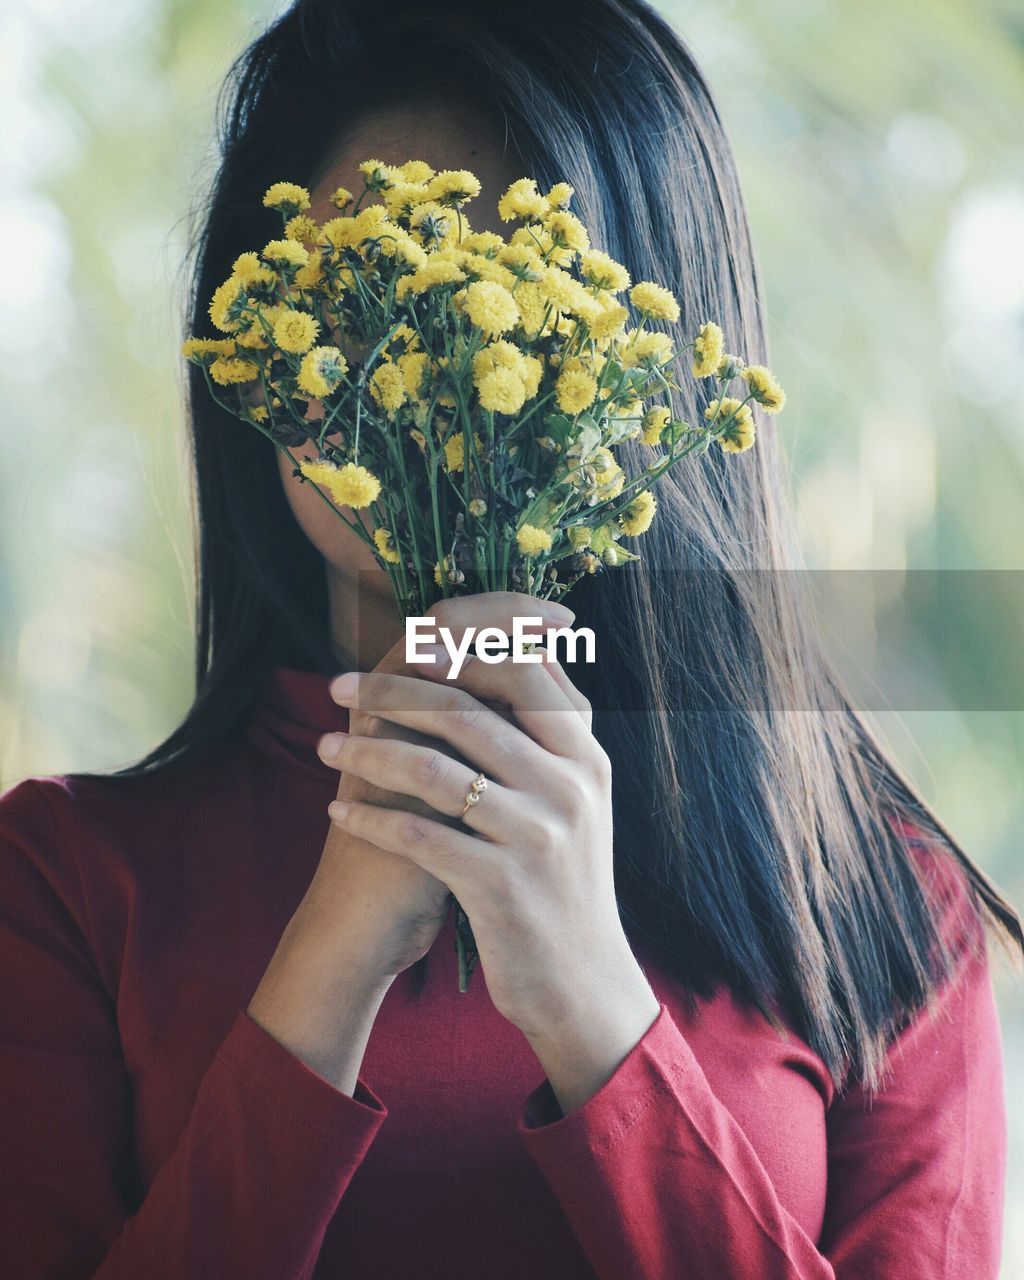 Woman holding flowers in front of her face